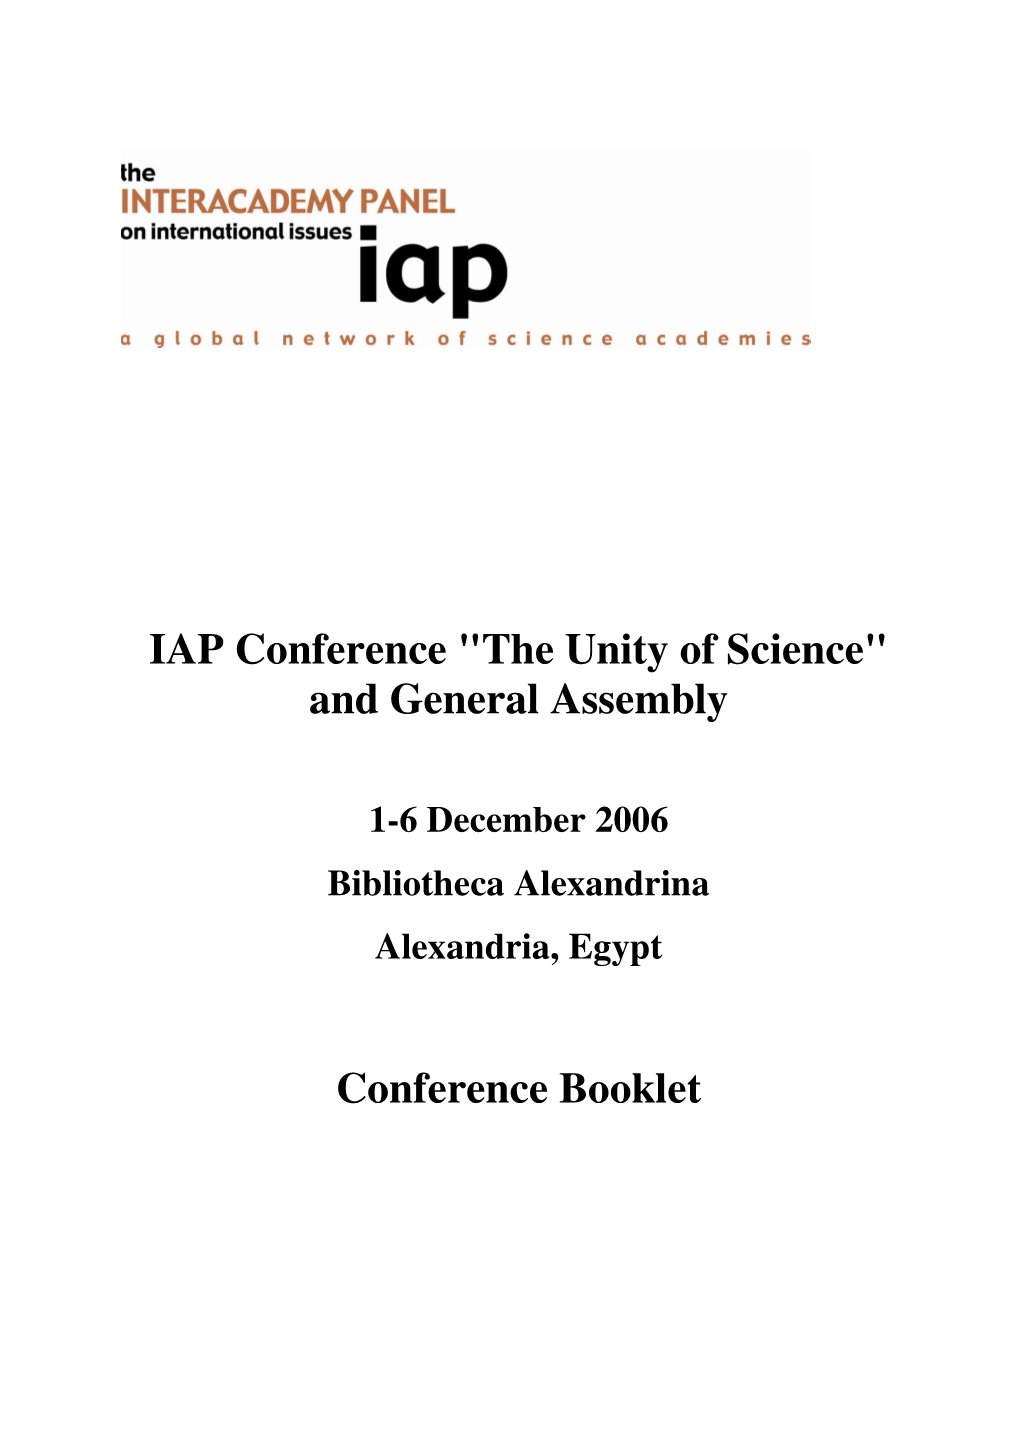 IAP Conference "The Unity of Science" and General Assembly Conference Booklet